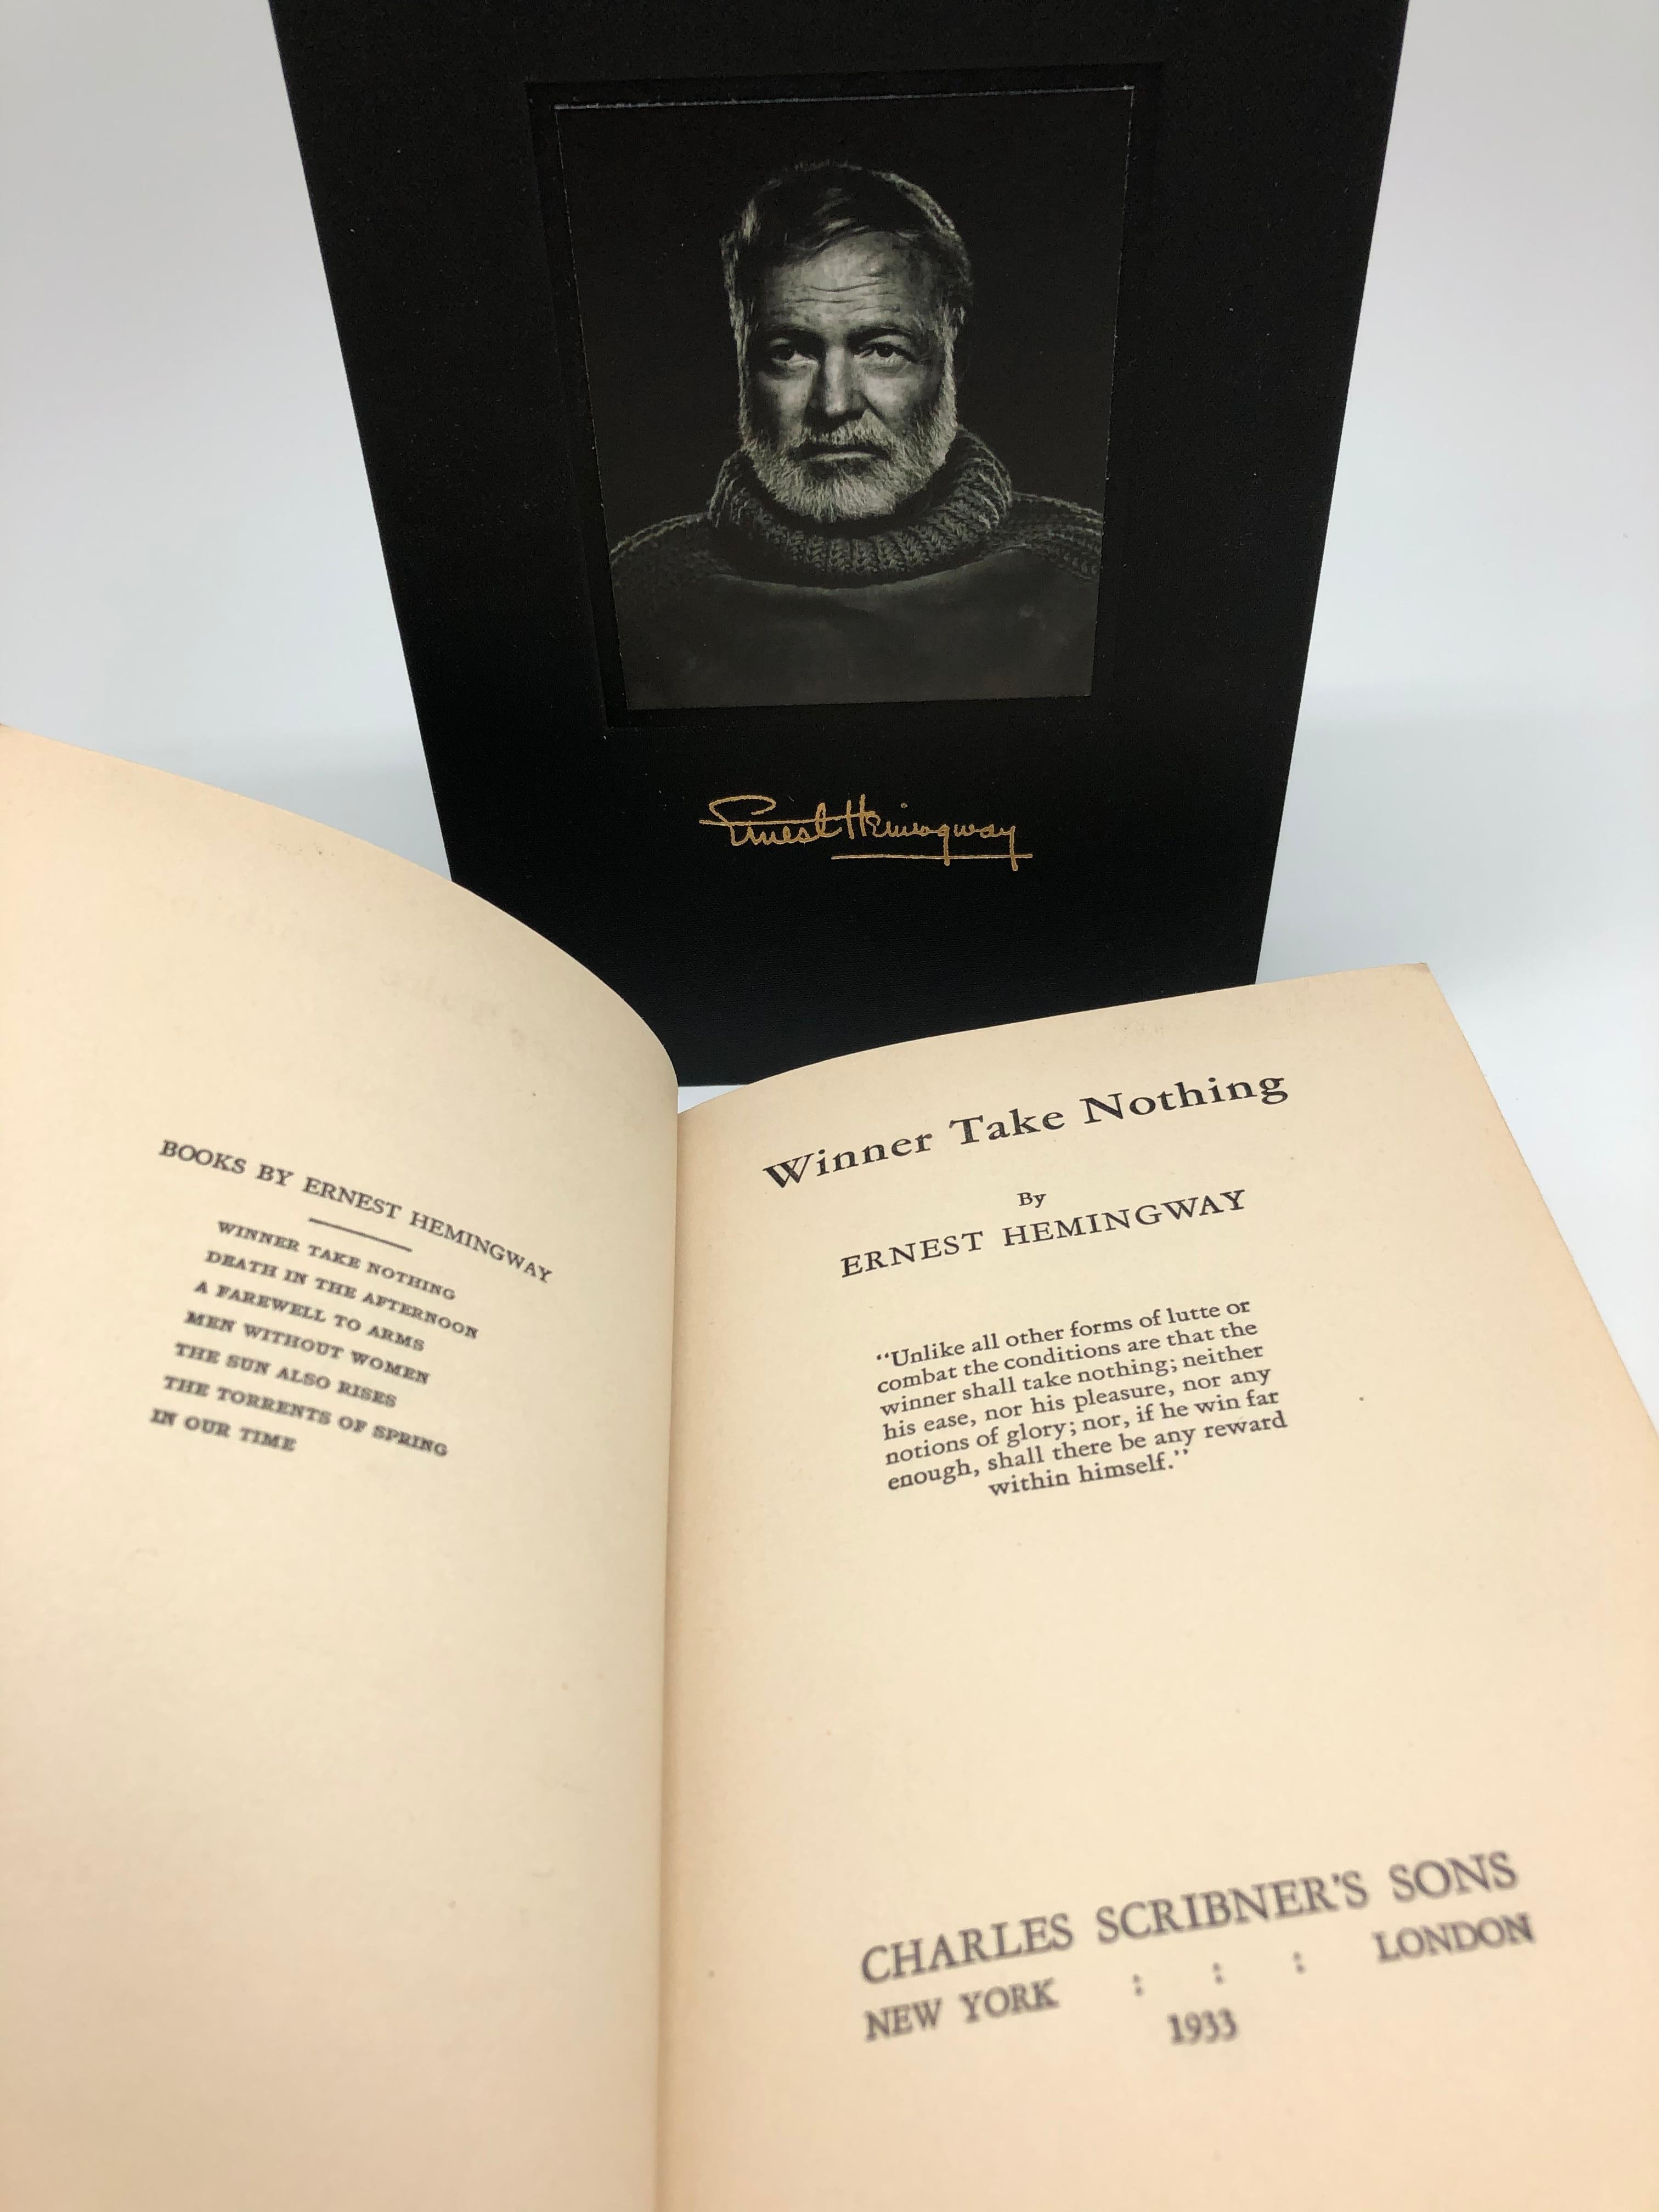 Hemingway, Ernest. Winner Take Nothing. New York: Charles Scribner's Sons, 1933. First edition, first printing. Octavo, bound in quarter leather raised and gilt spine. Housed in a custom slipcase that features a portrait of the author on the